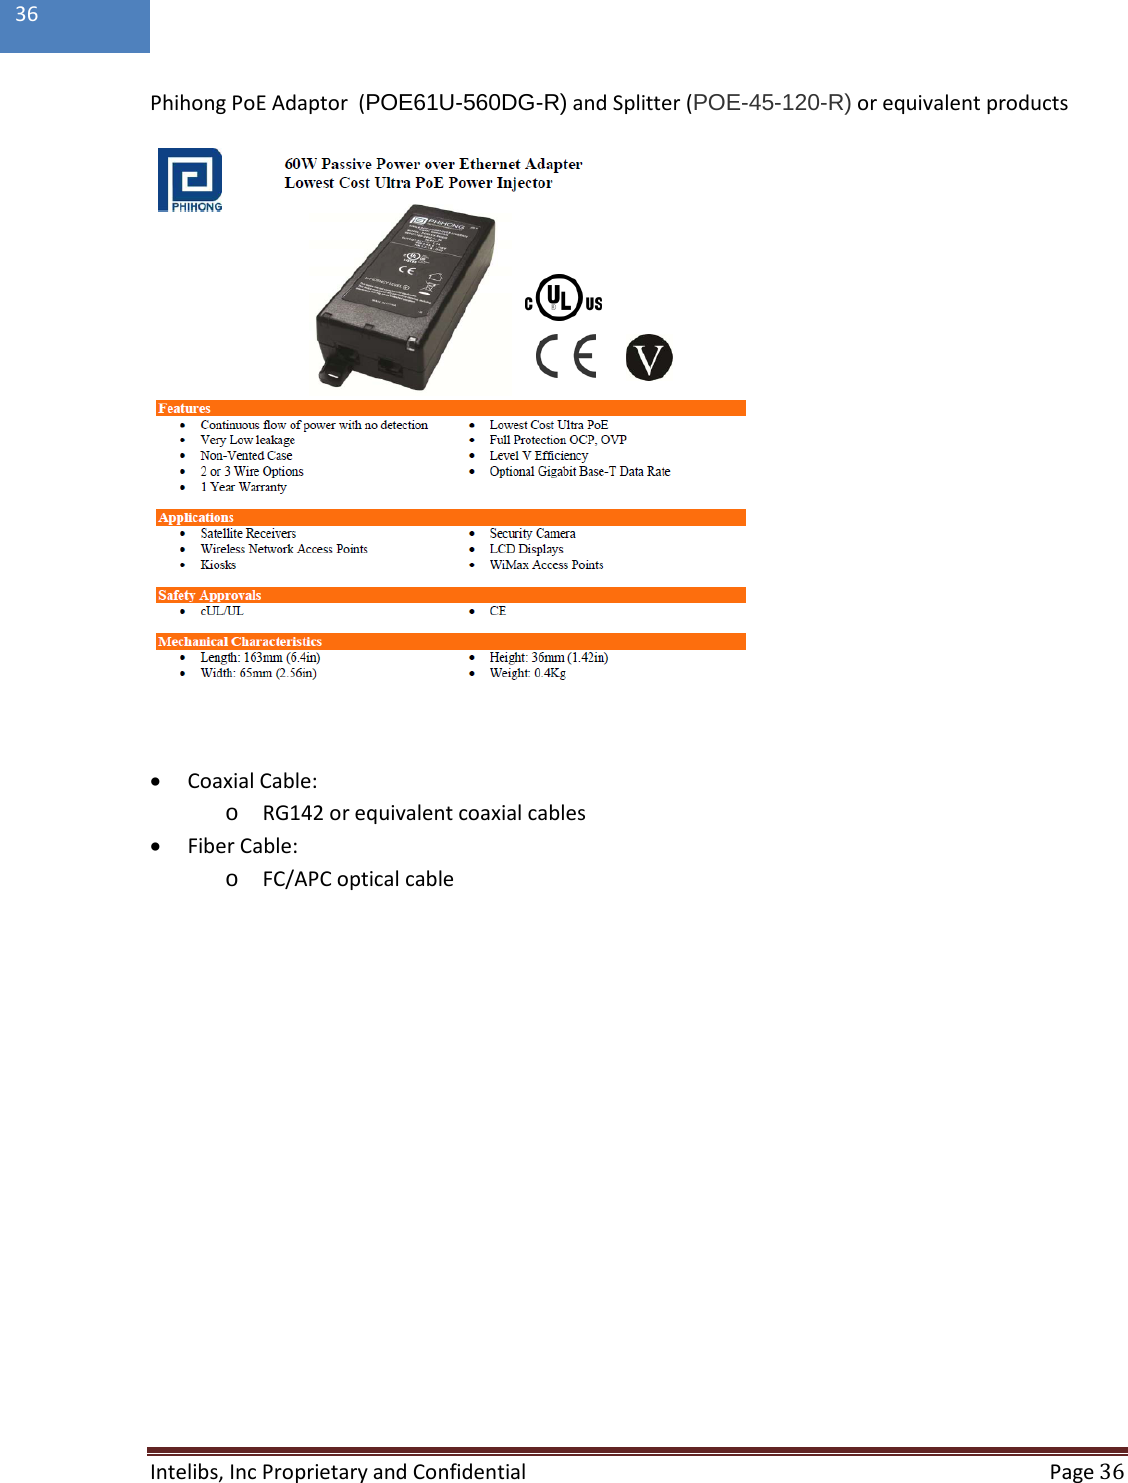  Intelibs, Inc Proprietary and Confidential  Page 36  36  Phihong PoE Adaptor  (POE61U-560DG-R) and Splitter (POE-45-120-R) or equivalent products    • Coaxial Cable: o RG142 or equivalent coaxial cables • Fiber Cable: o FC/APC optical cable        